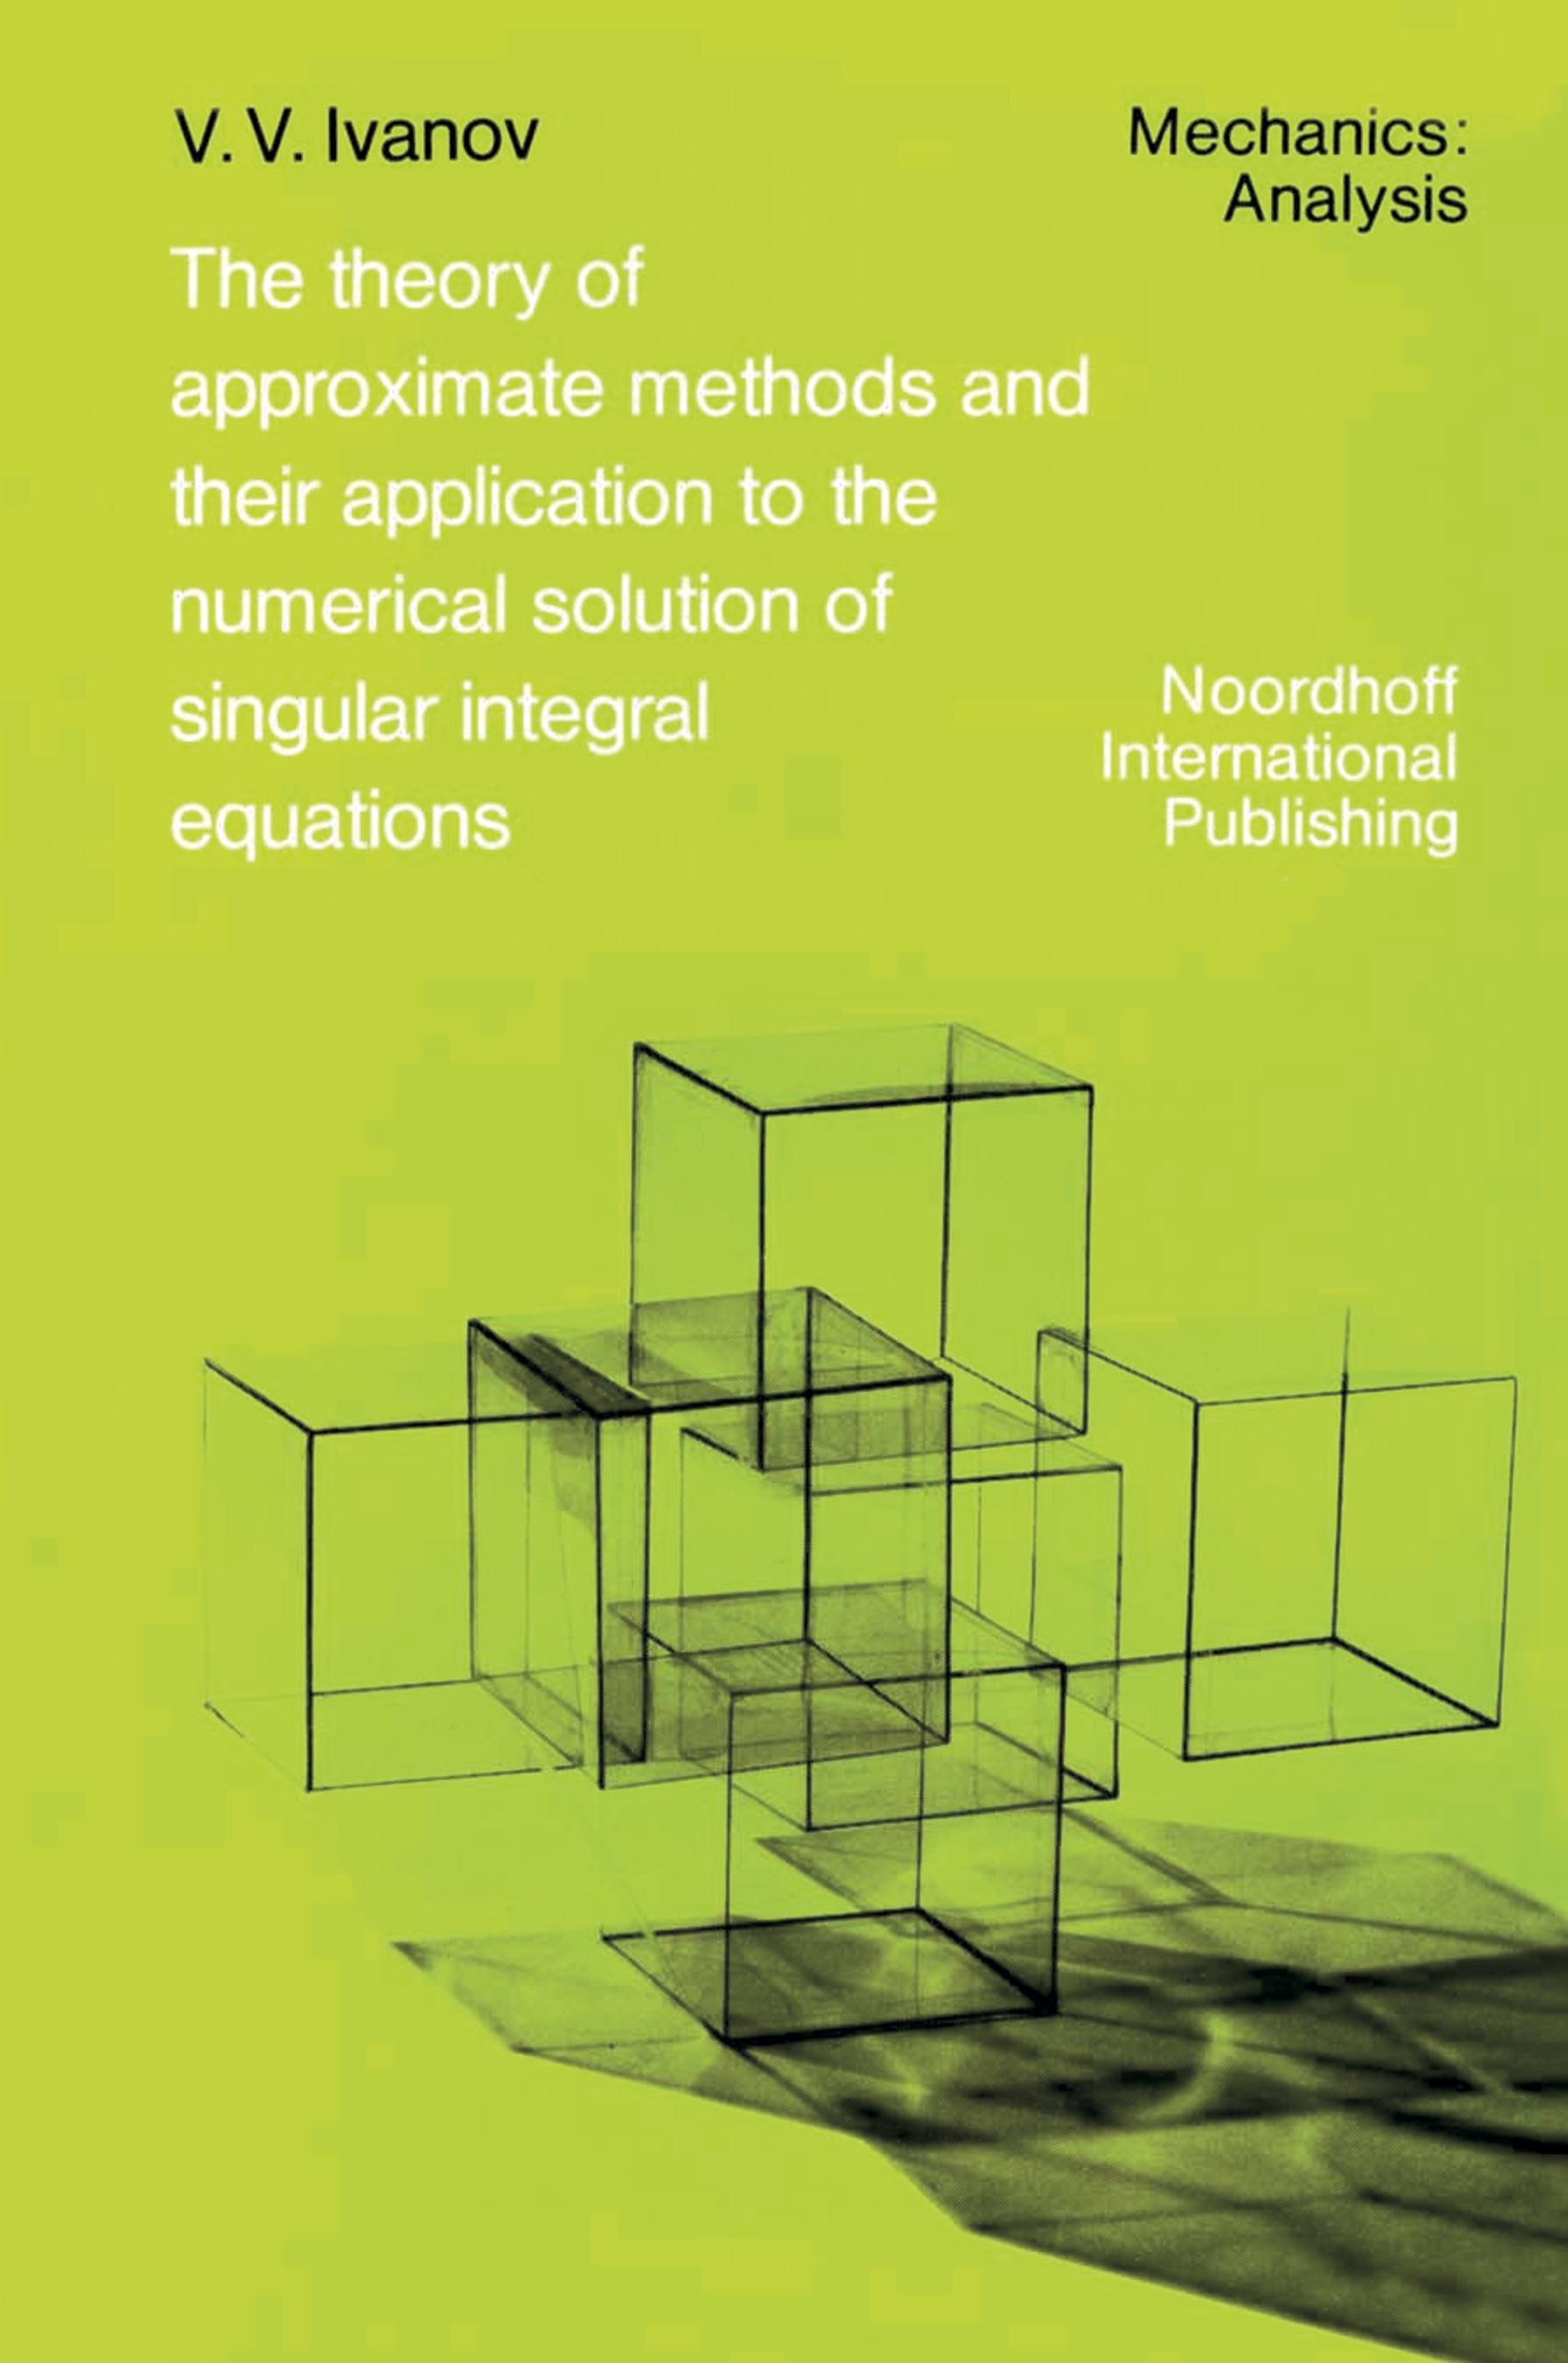 The Theory of Approximate Methods and Their Applications to the Numerical Solution of Singular Integral Equations - A.A. Ivanov